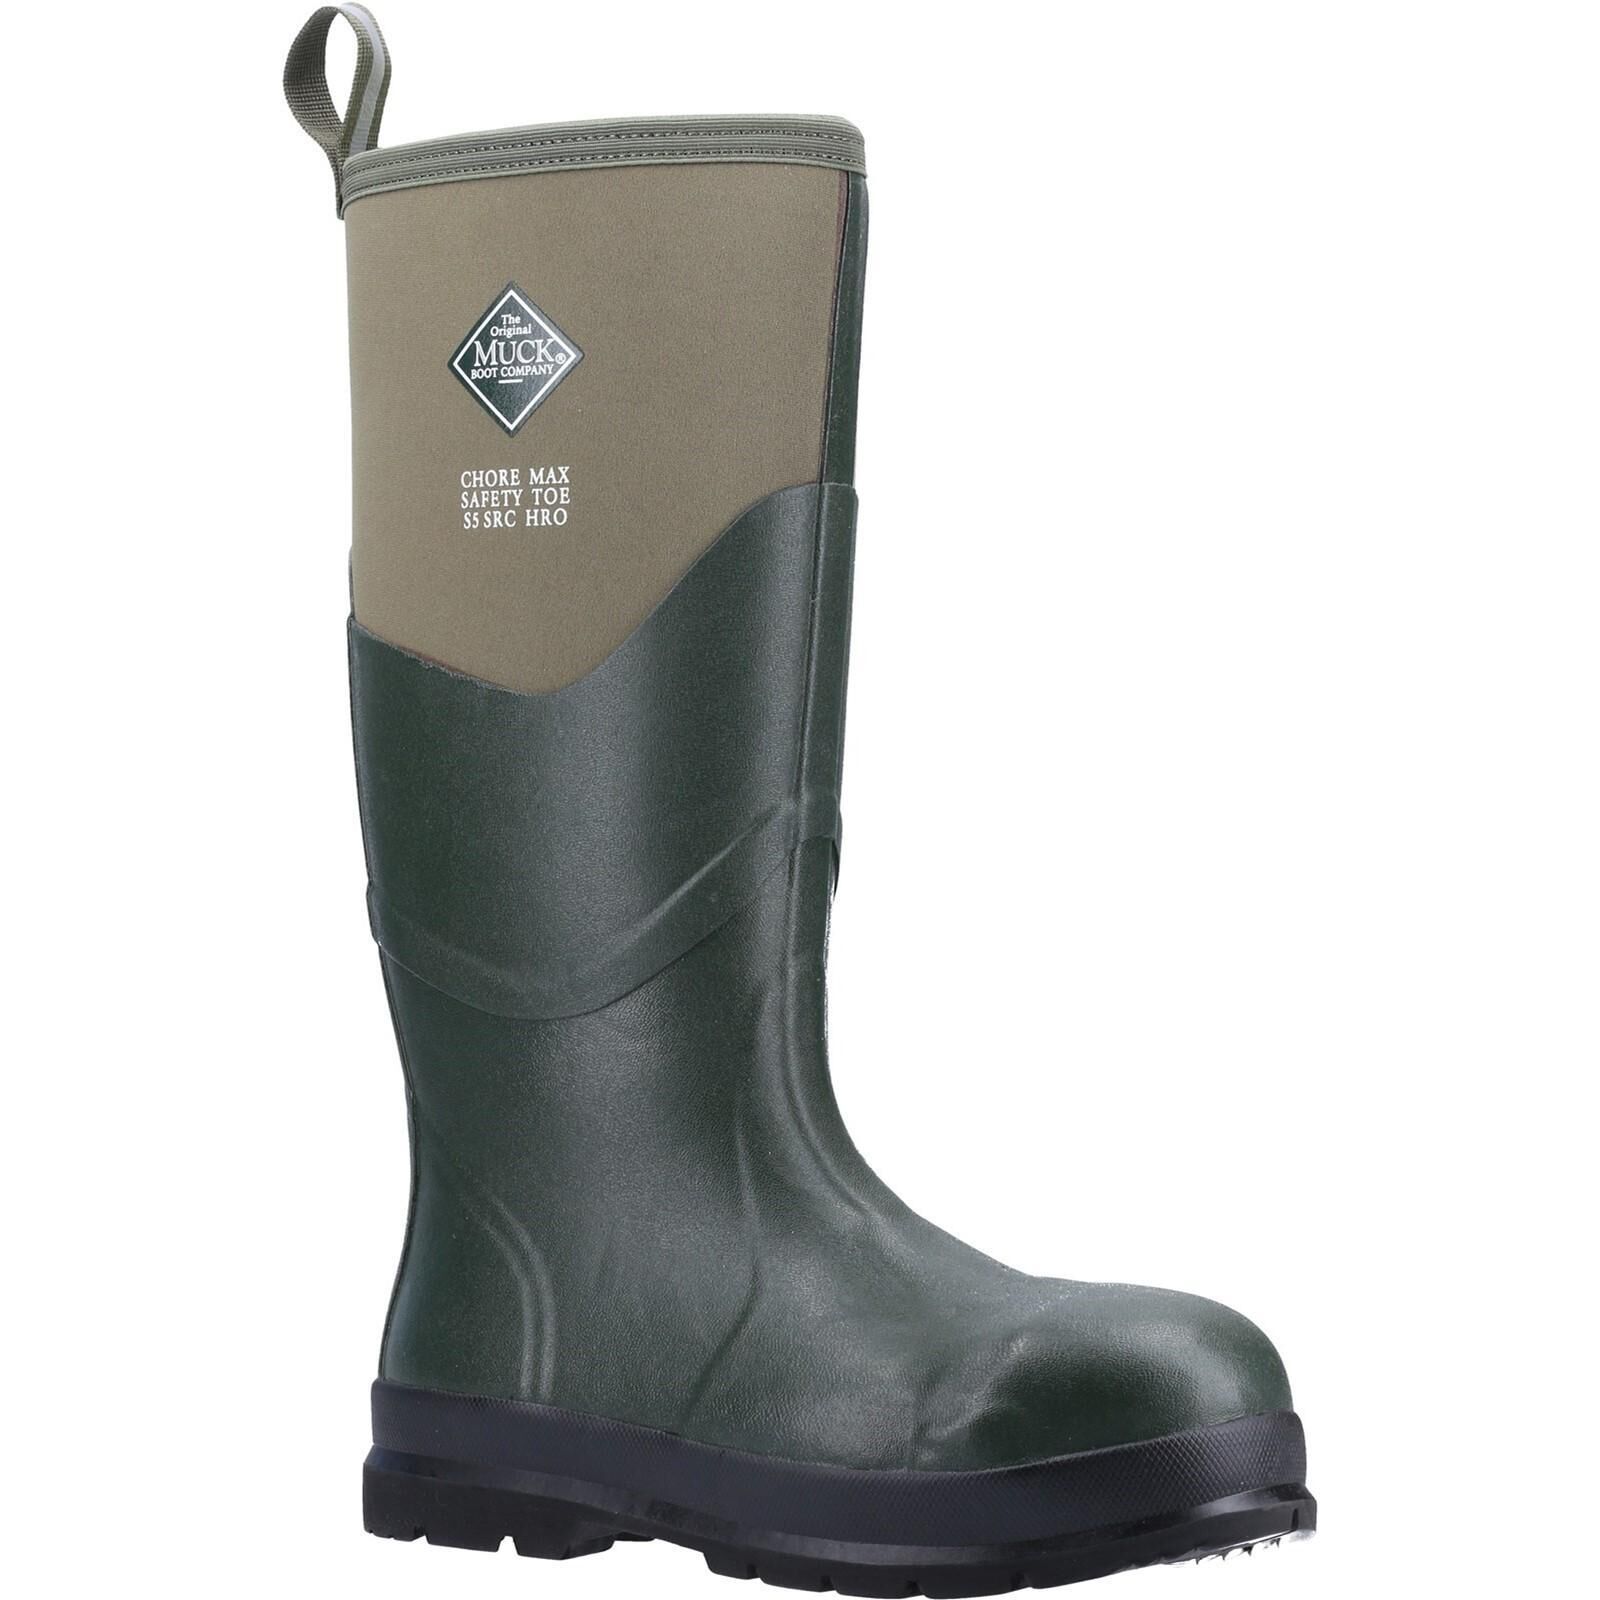 MUCK BOOTS Unisex Adults Chore Max S5 Safety Welllington (Moss)